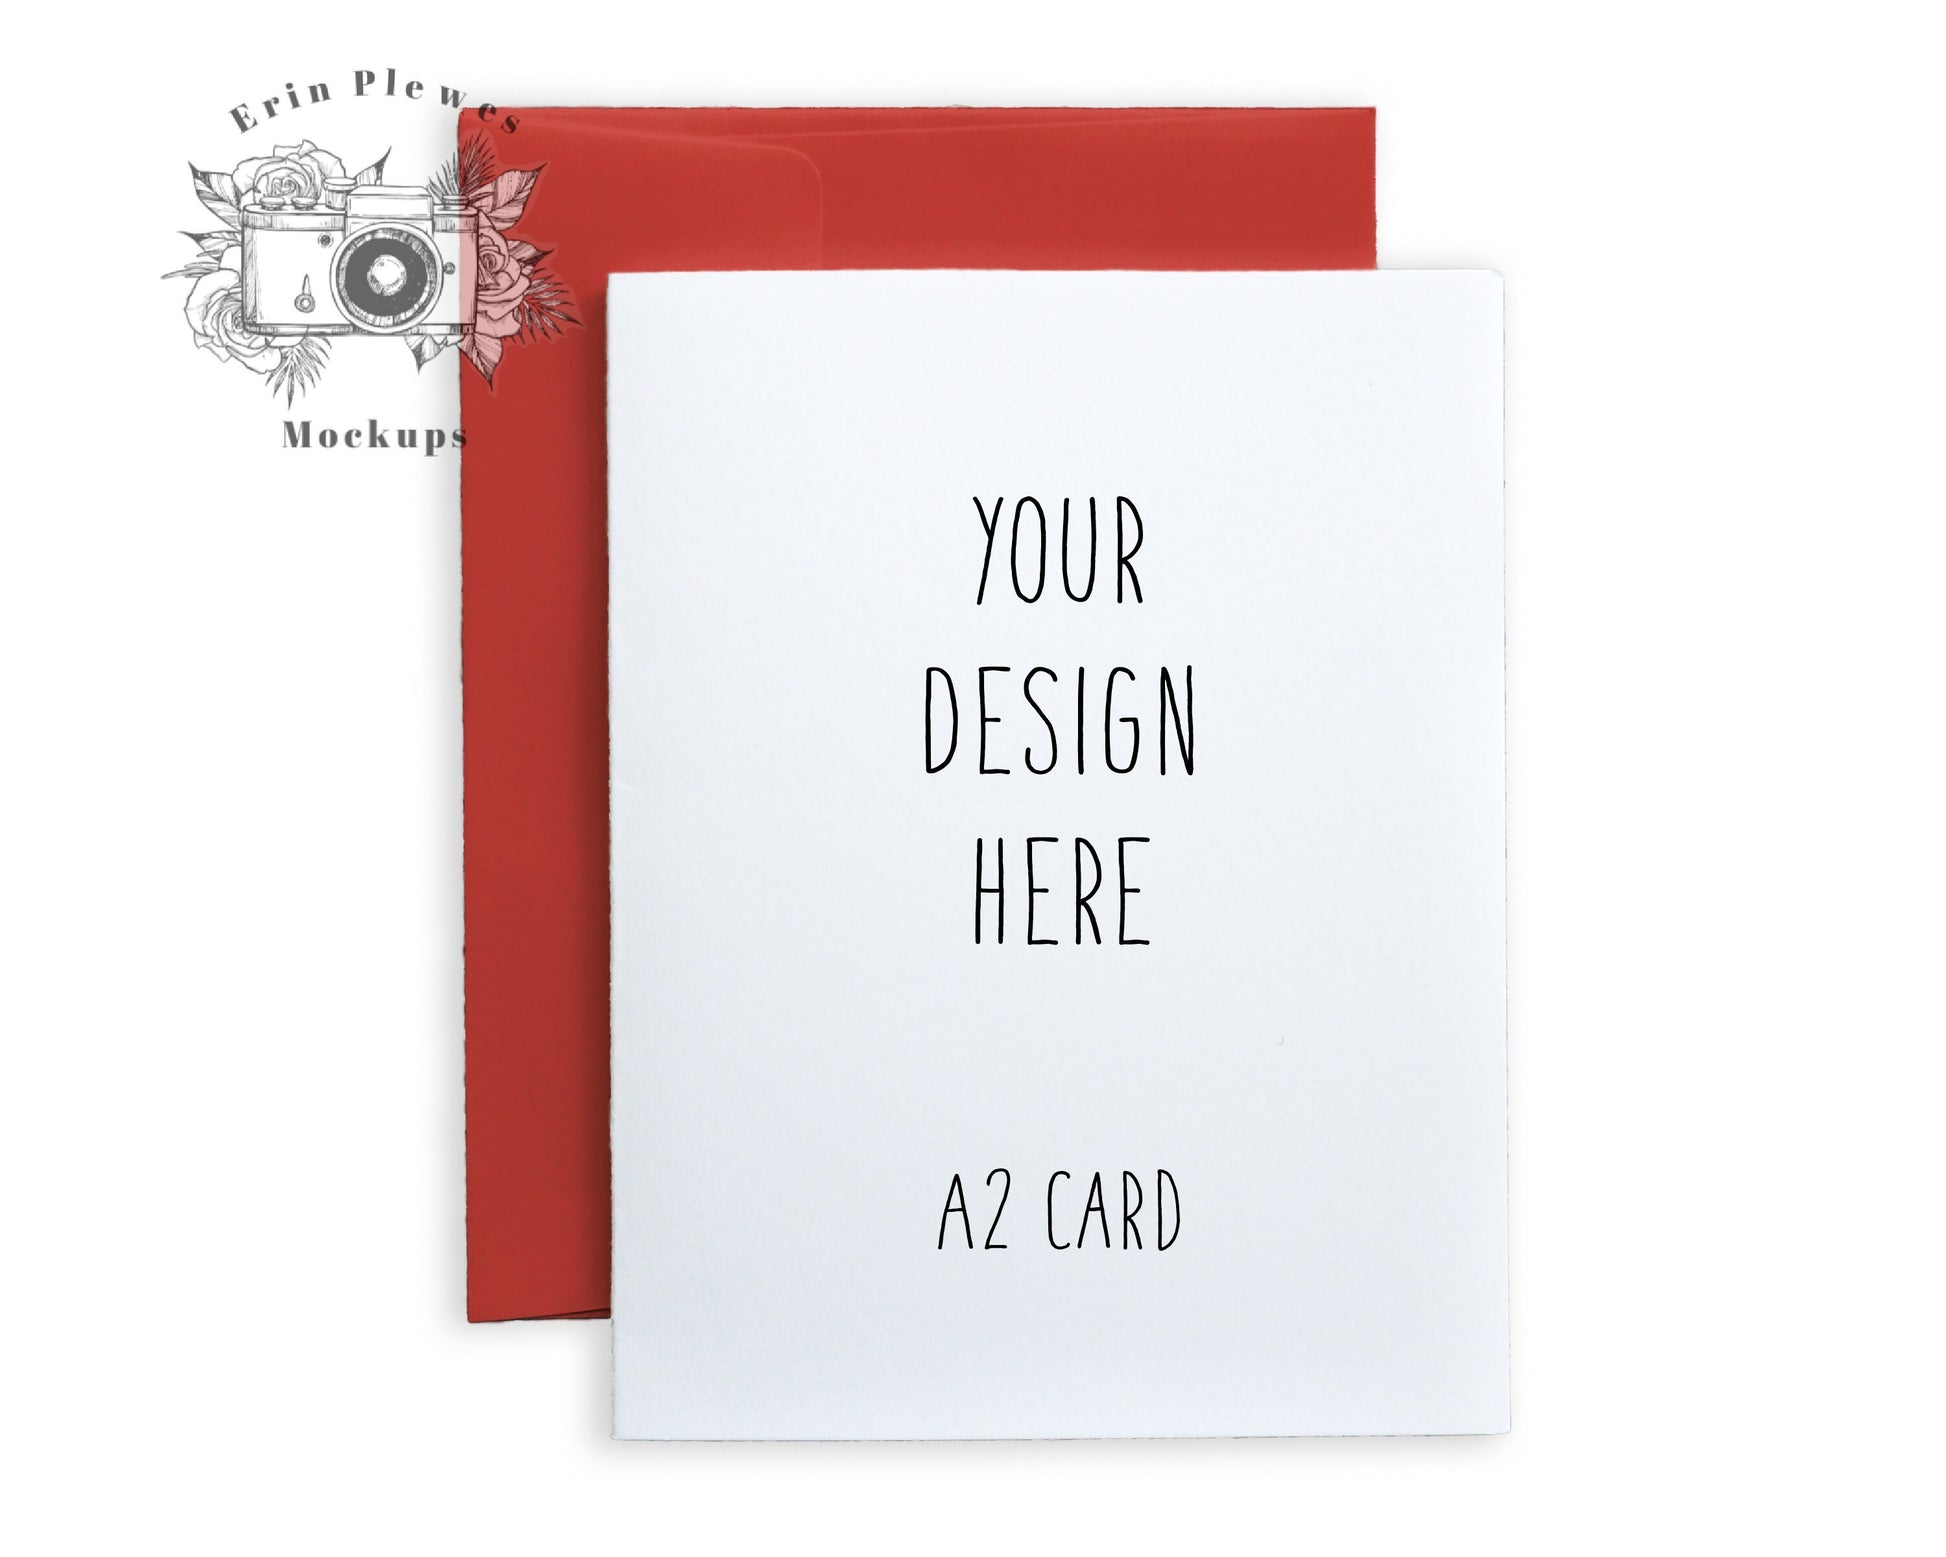 A2 card mockup with red envelope PNG, Invitation mock-up with white background,  Jpeg PNG Instant Digital Download Template